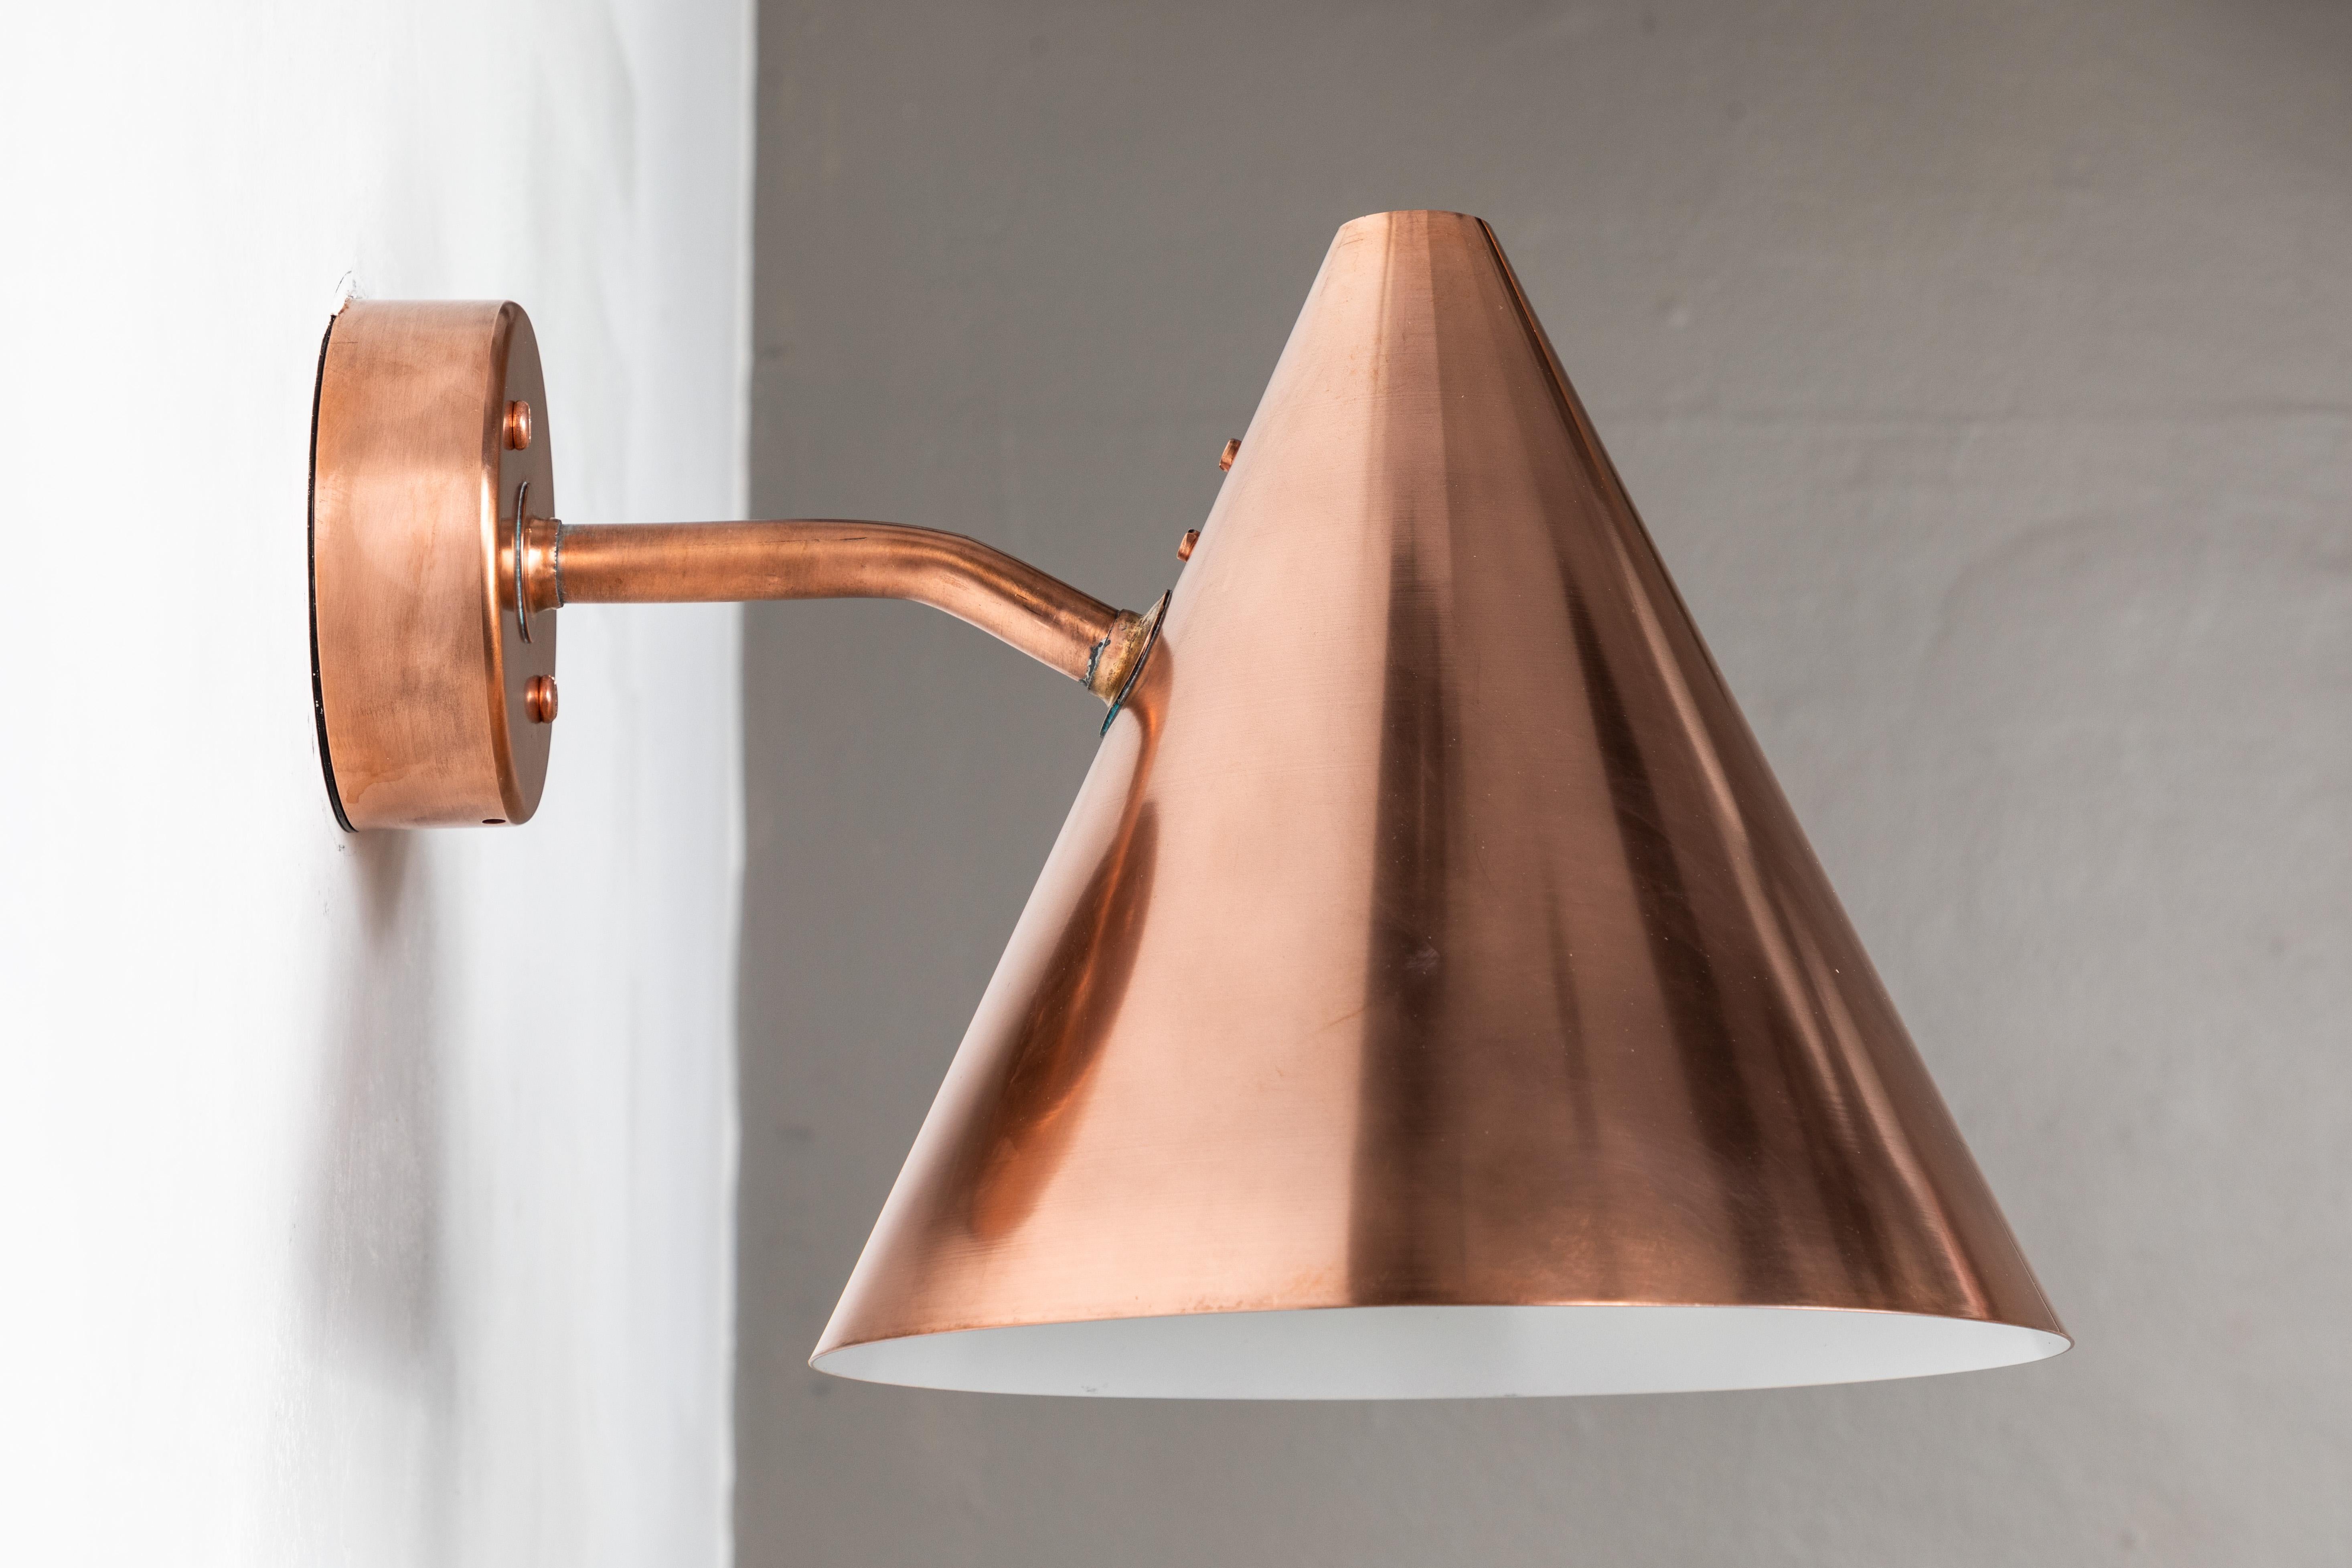 Polished Hans-Agne Jakobsson 'Tratten' Raw Copper Outdoor Sconce For Sale